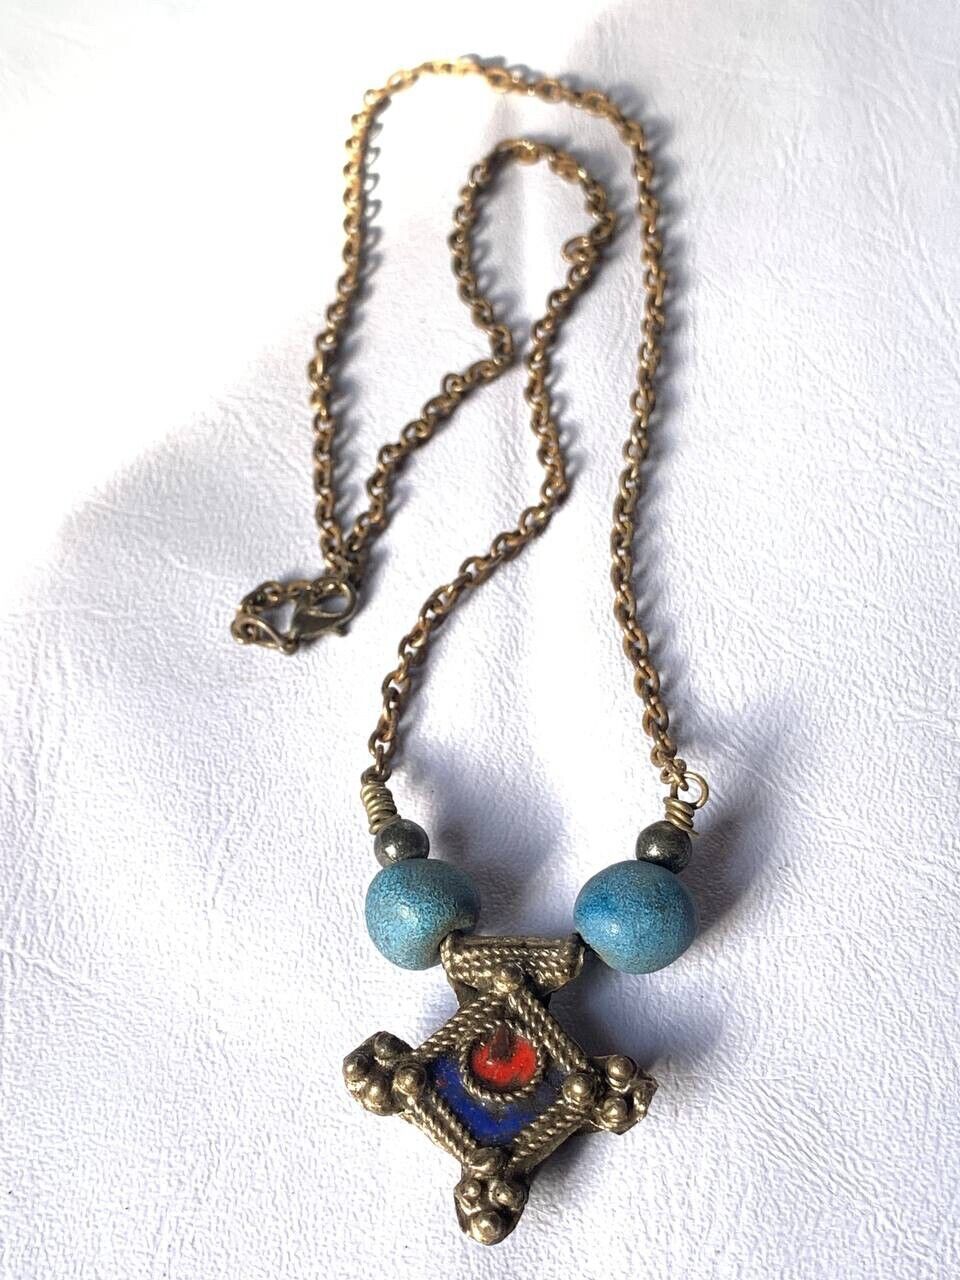 ANTIQUE ANCIENT VICTORIAN STUNNING RARE SILVER NECKLACE PENDANT TURQUOISE STONES